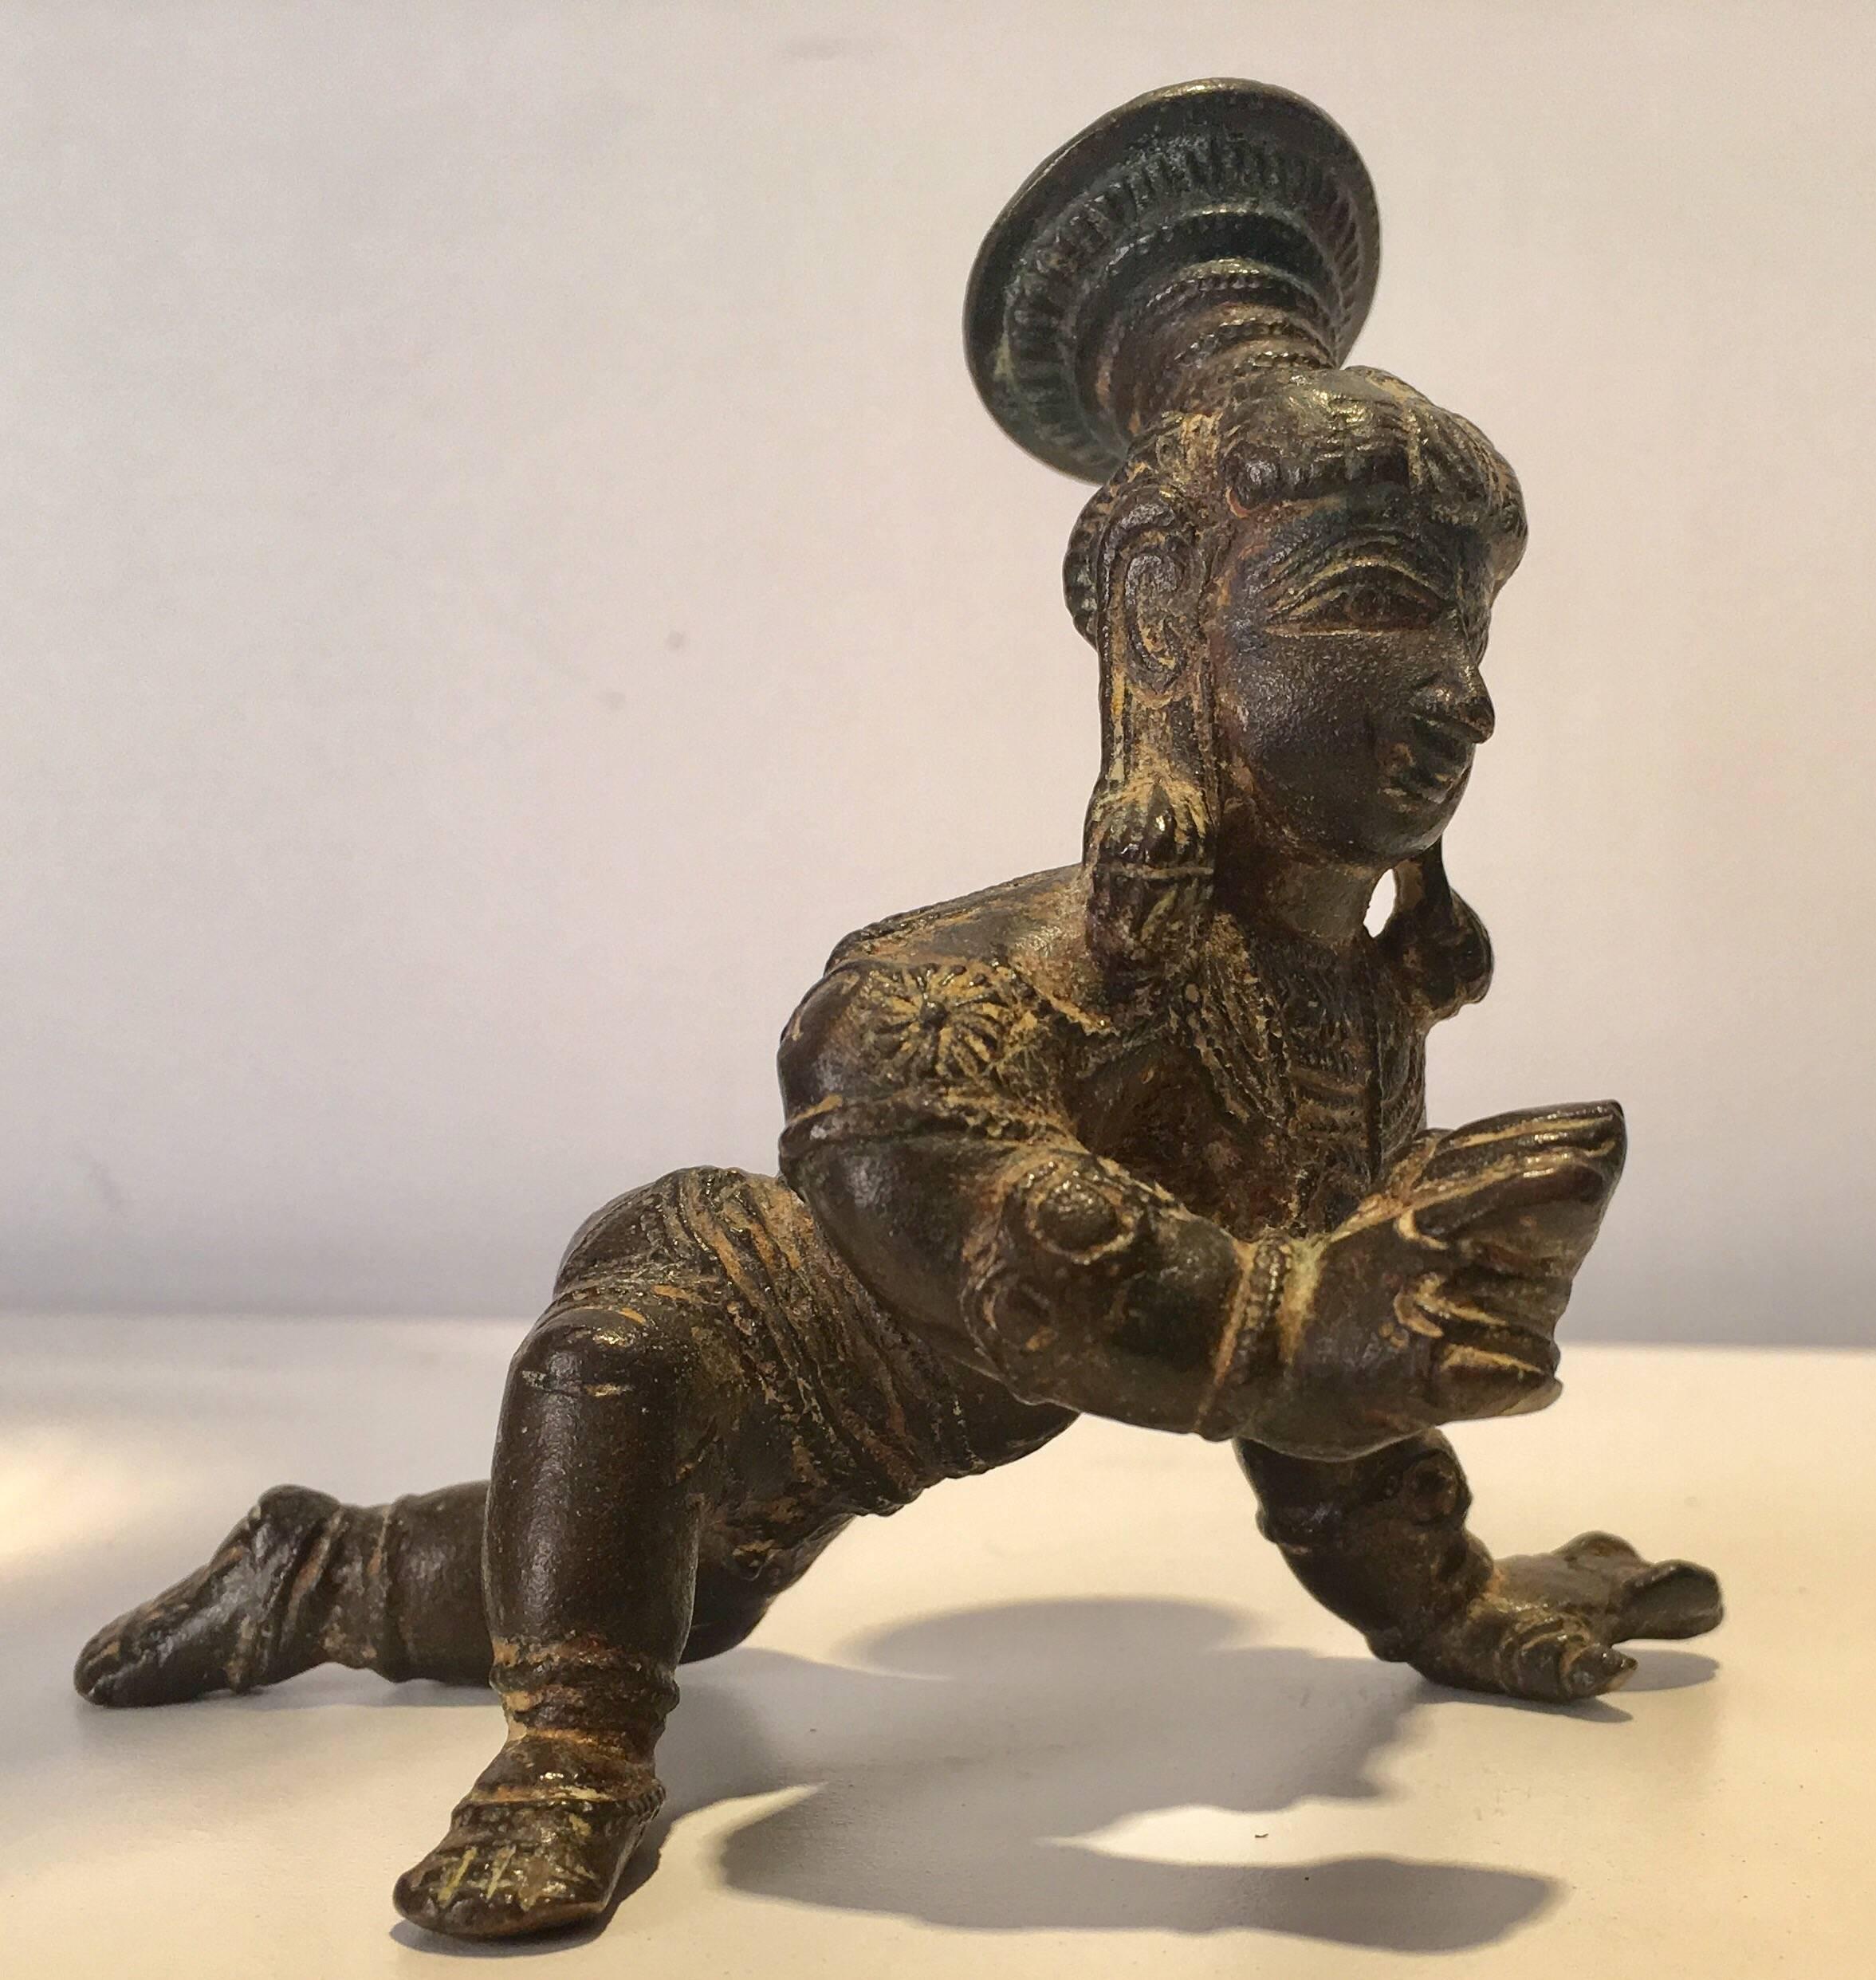 Charming bronze casting of the Hindu god Krishna as a baby. Deaccessioned from an old museum collection associated with a university. Good patina with well cast details. Lost wax casting. Closest example I could find was dated to the Vijayanagara